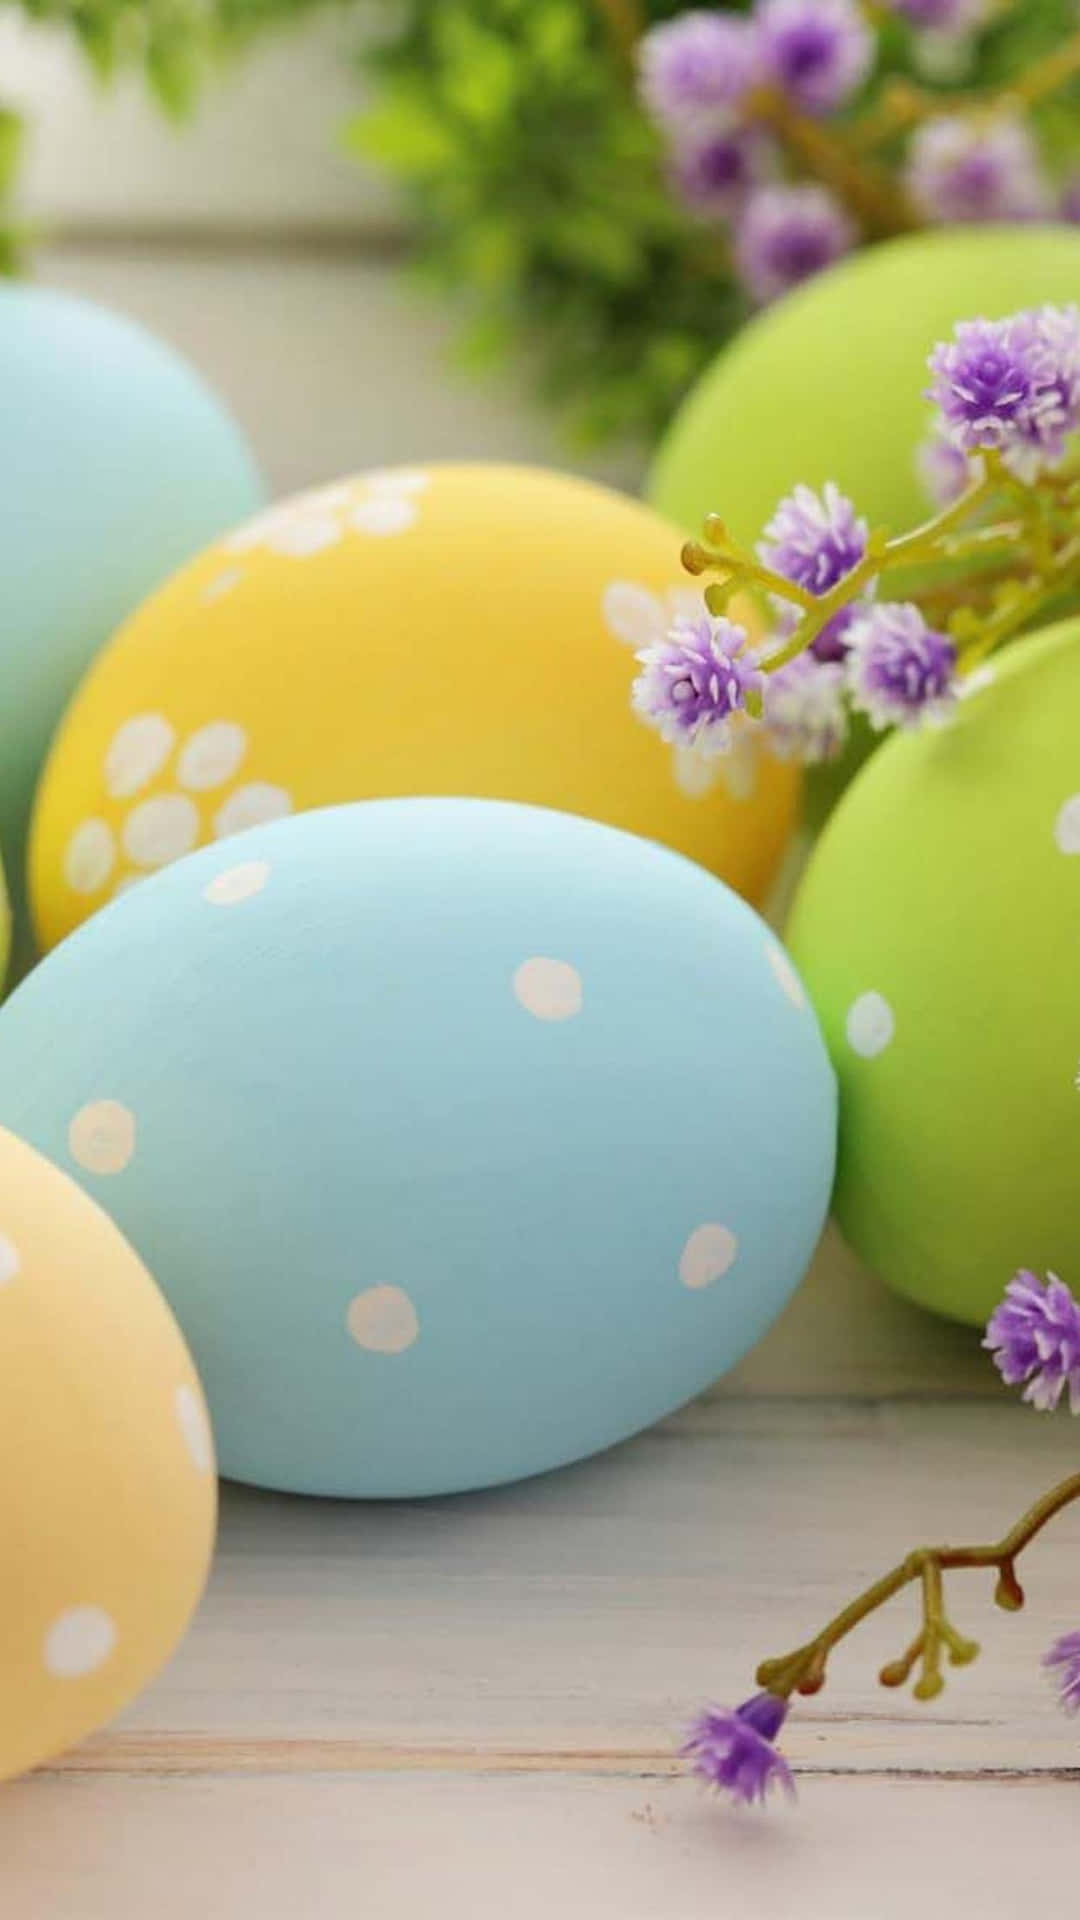 "Celebrate Easter with this cute pastel iPhone wallpaper!" Wallpaper